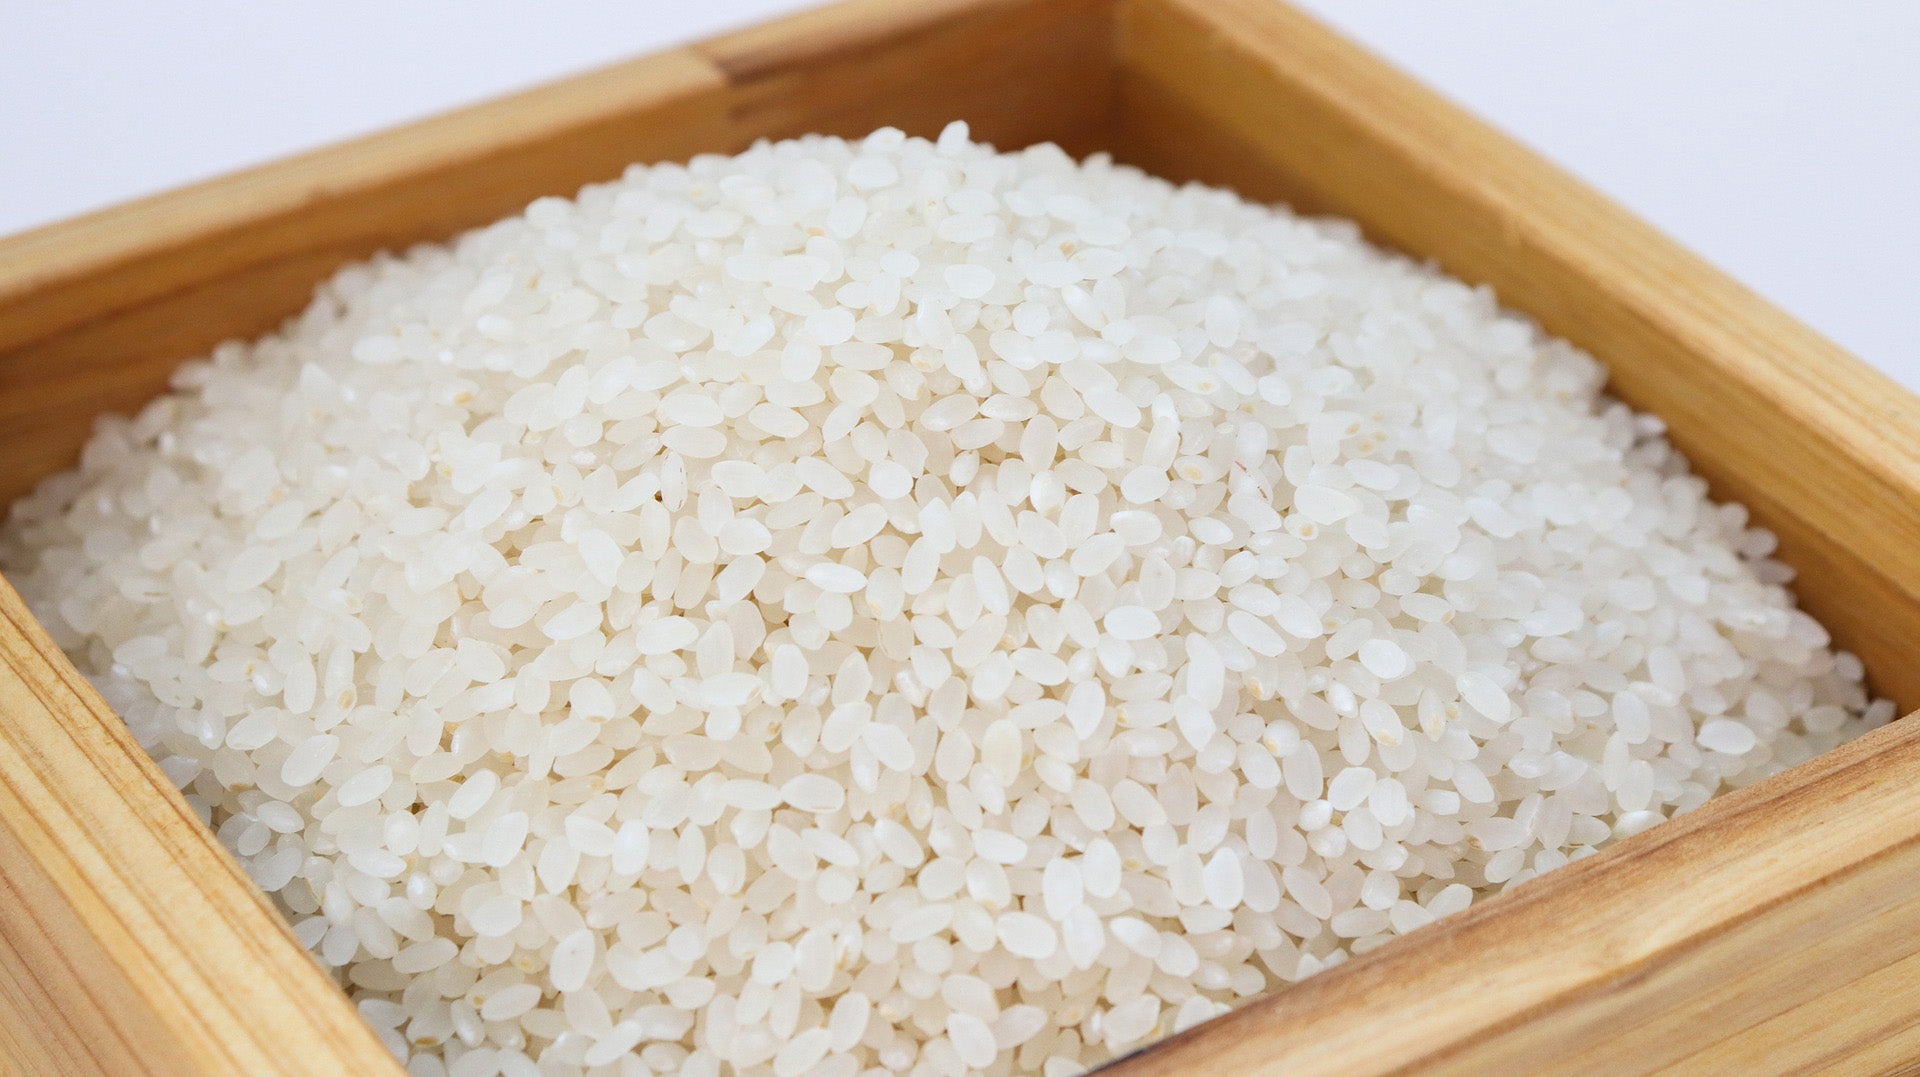 Uncooked rice in a wooden container